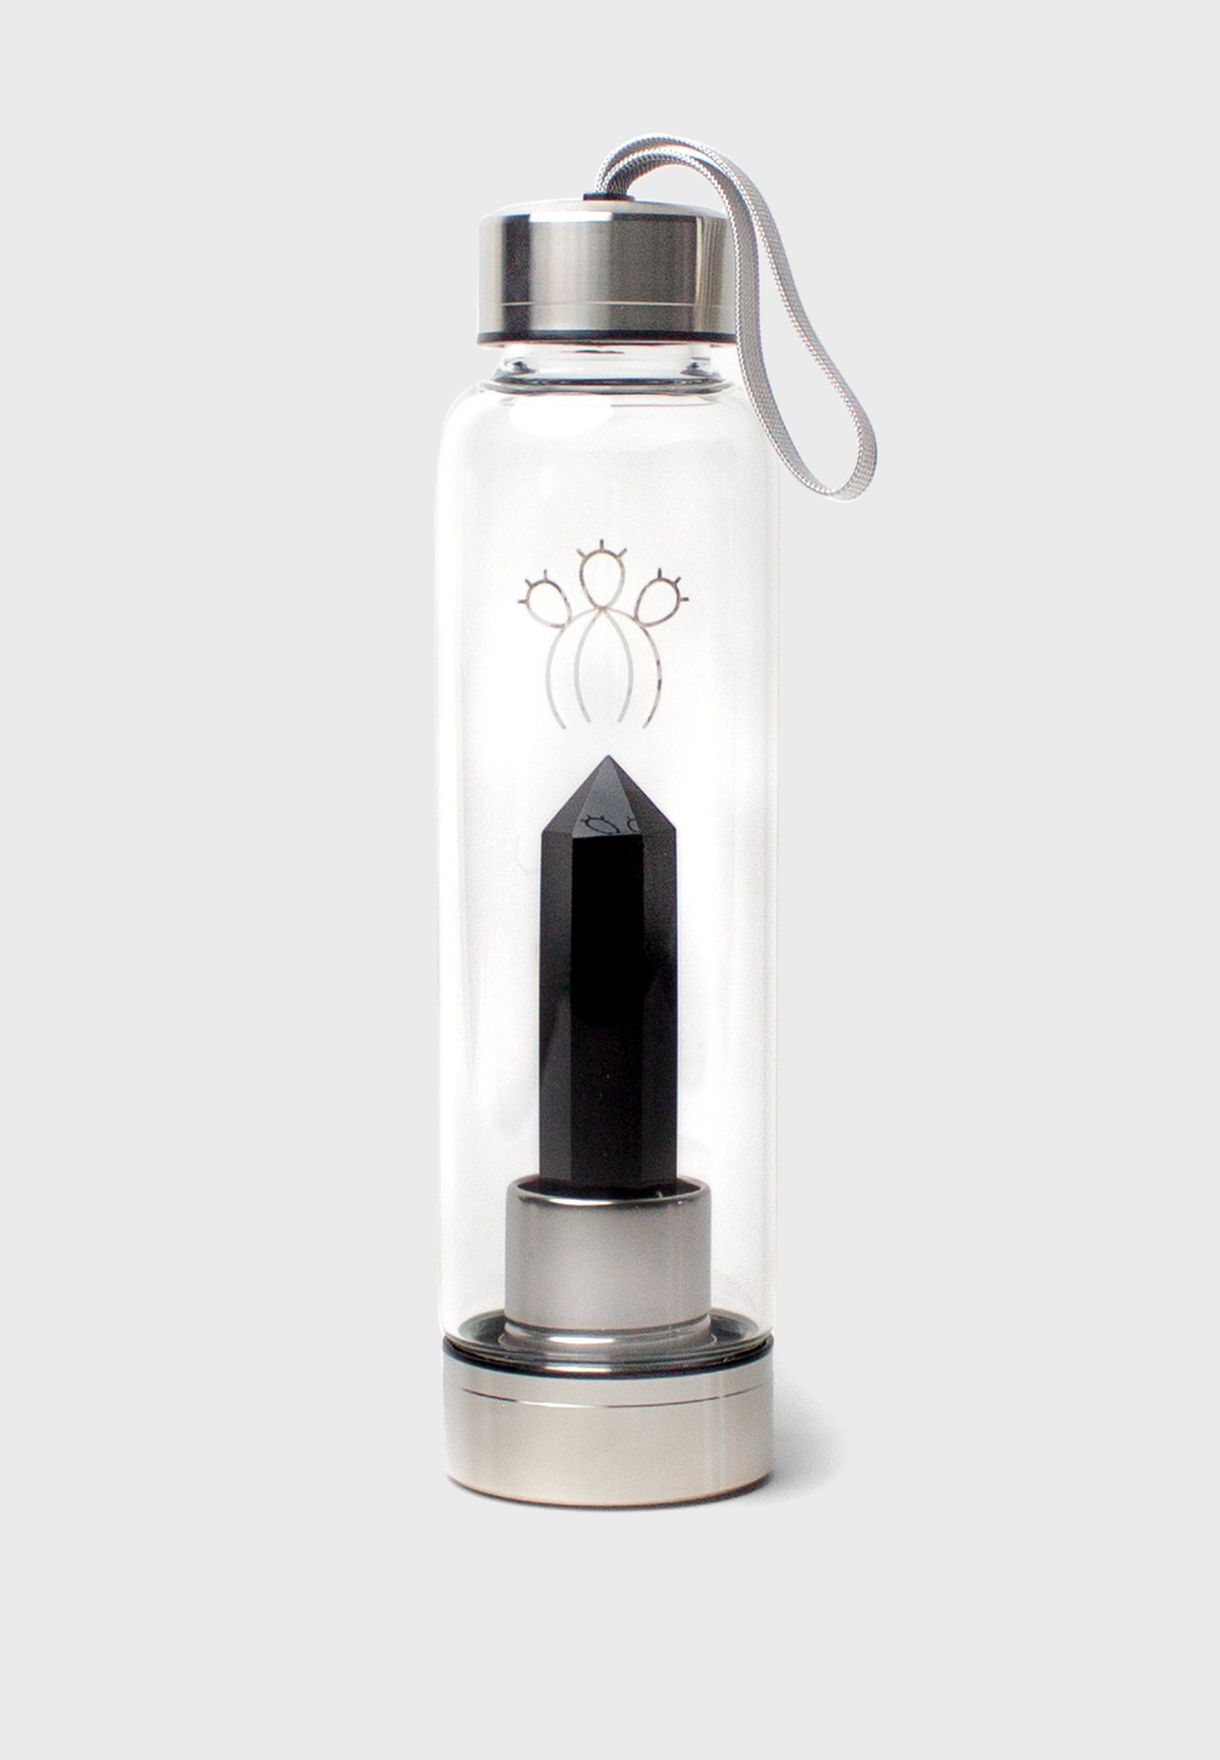 Crystal Infused Water Bottle With Cap